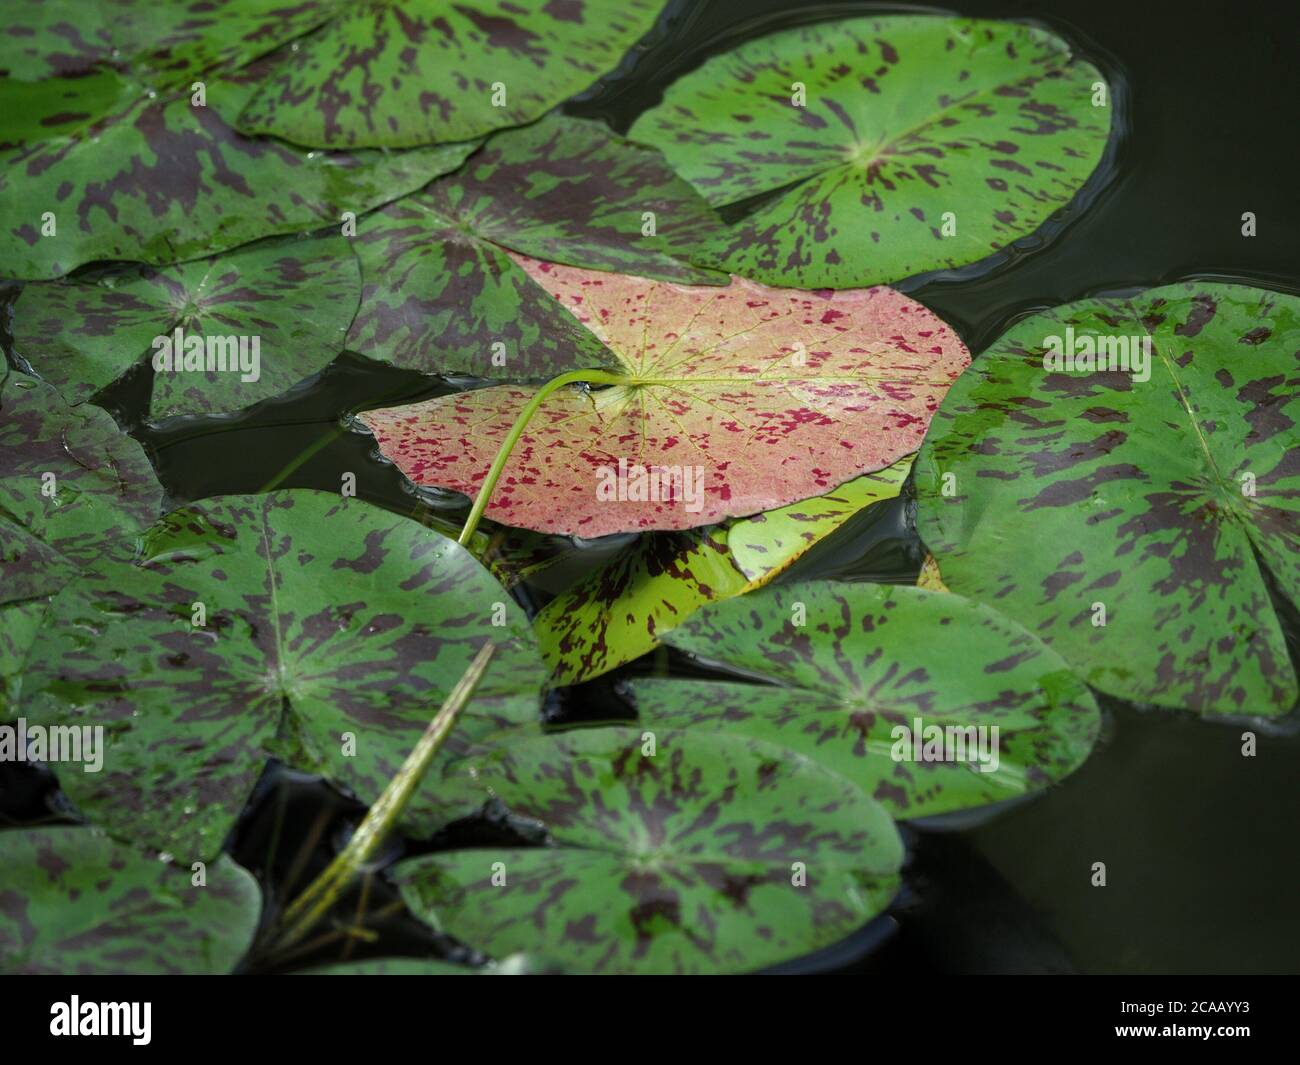 spotty green lily pads surround a contrasting pink blotchy overturned leaf in an ornamental lily pond Stock Photo